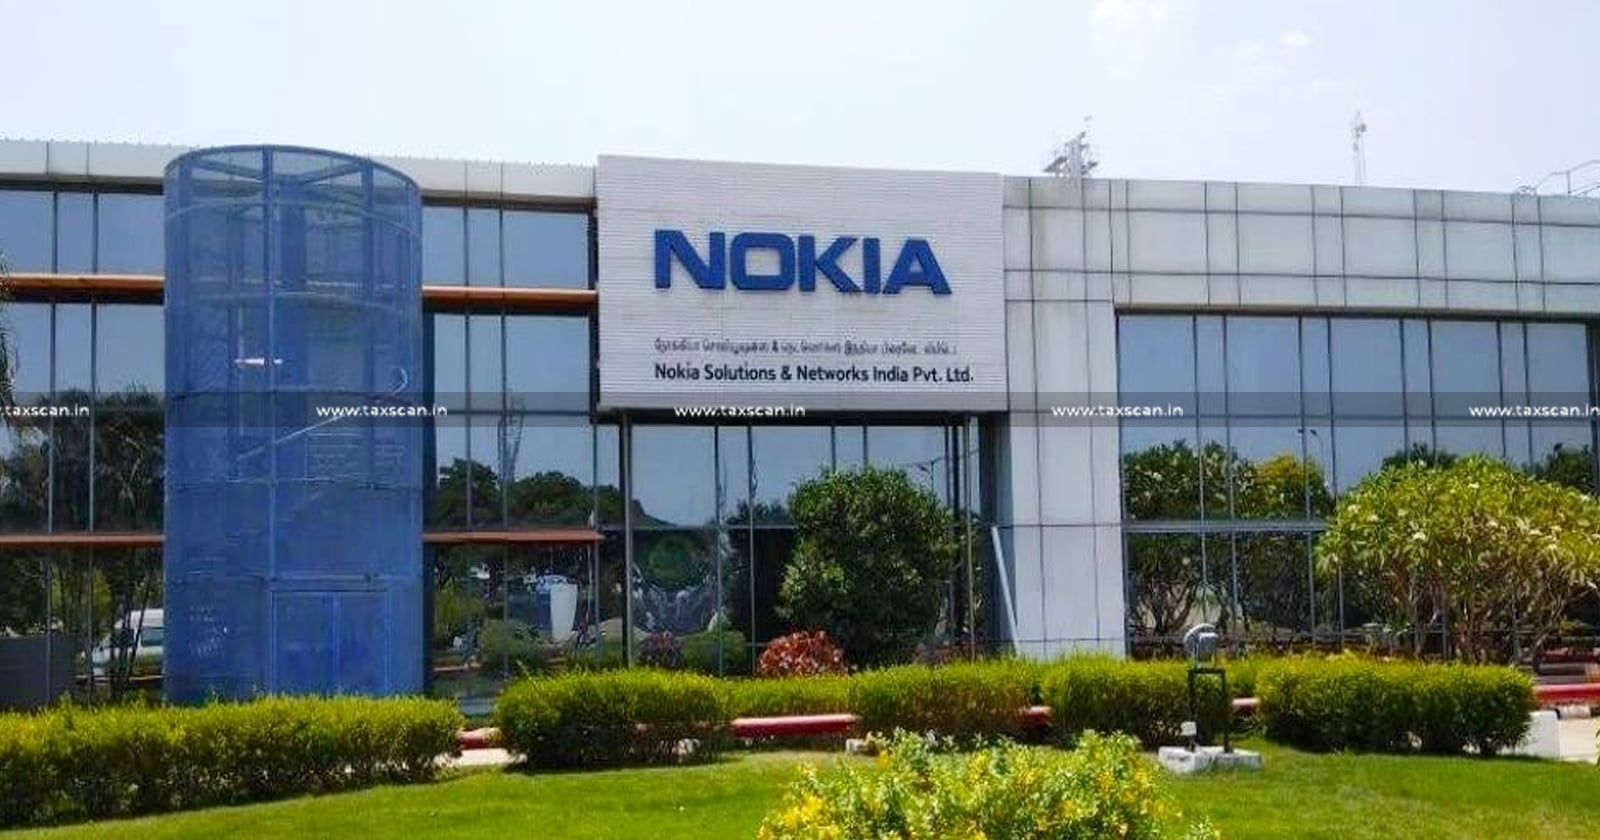 delhi-hc-directs-to-issue-income-tax-refund-to-nokia-corporation-based